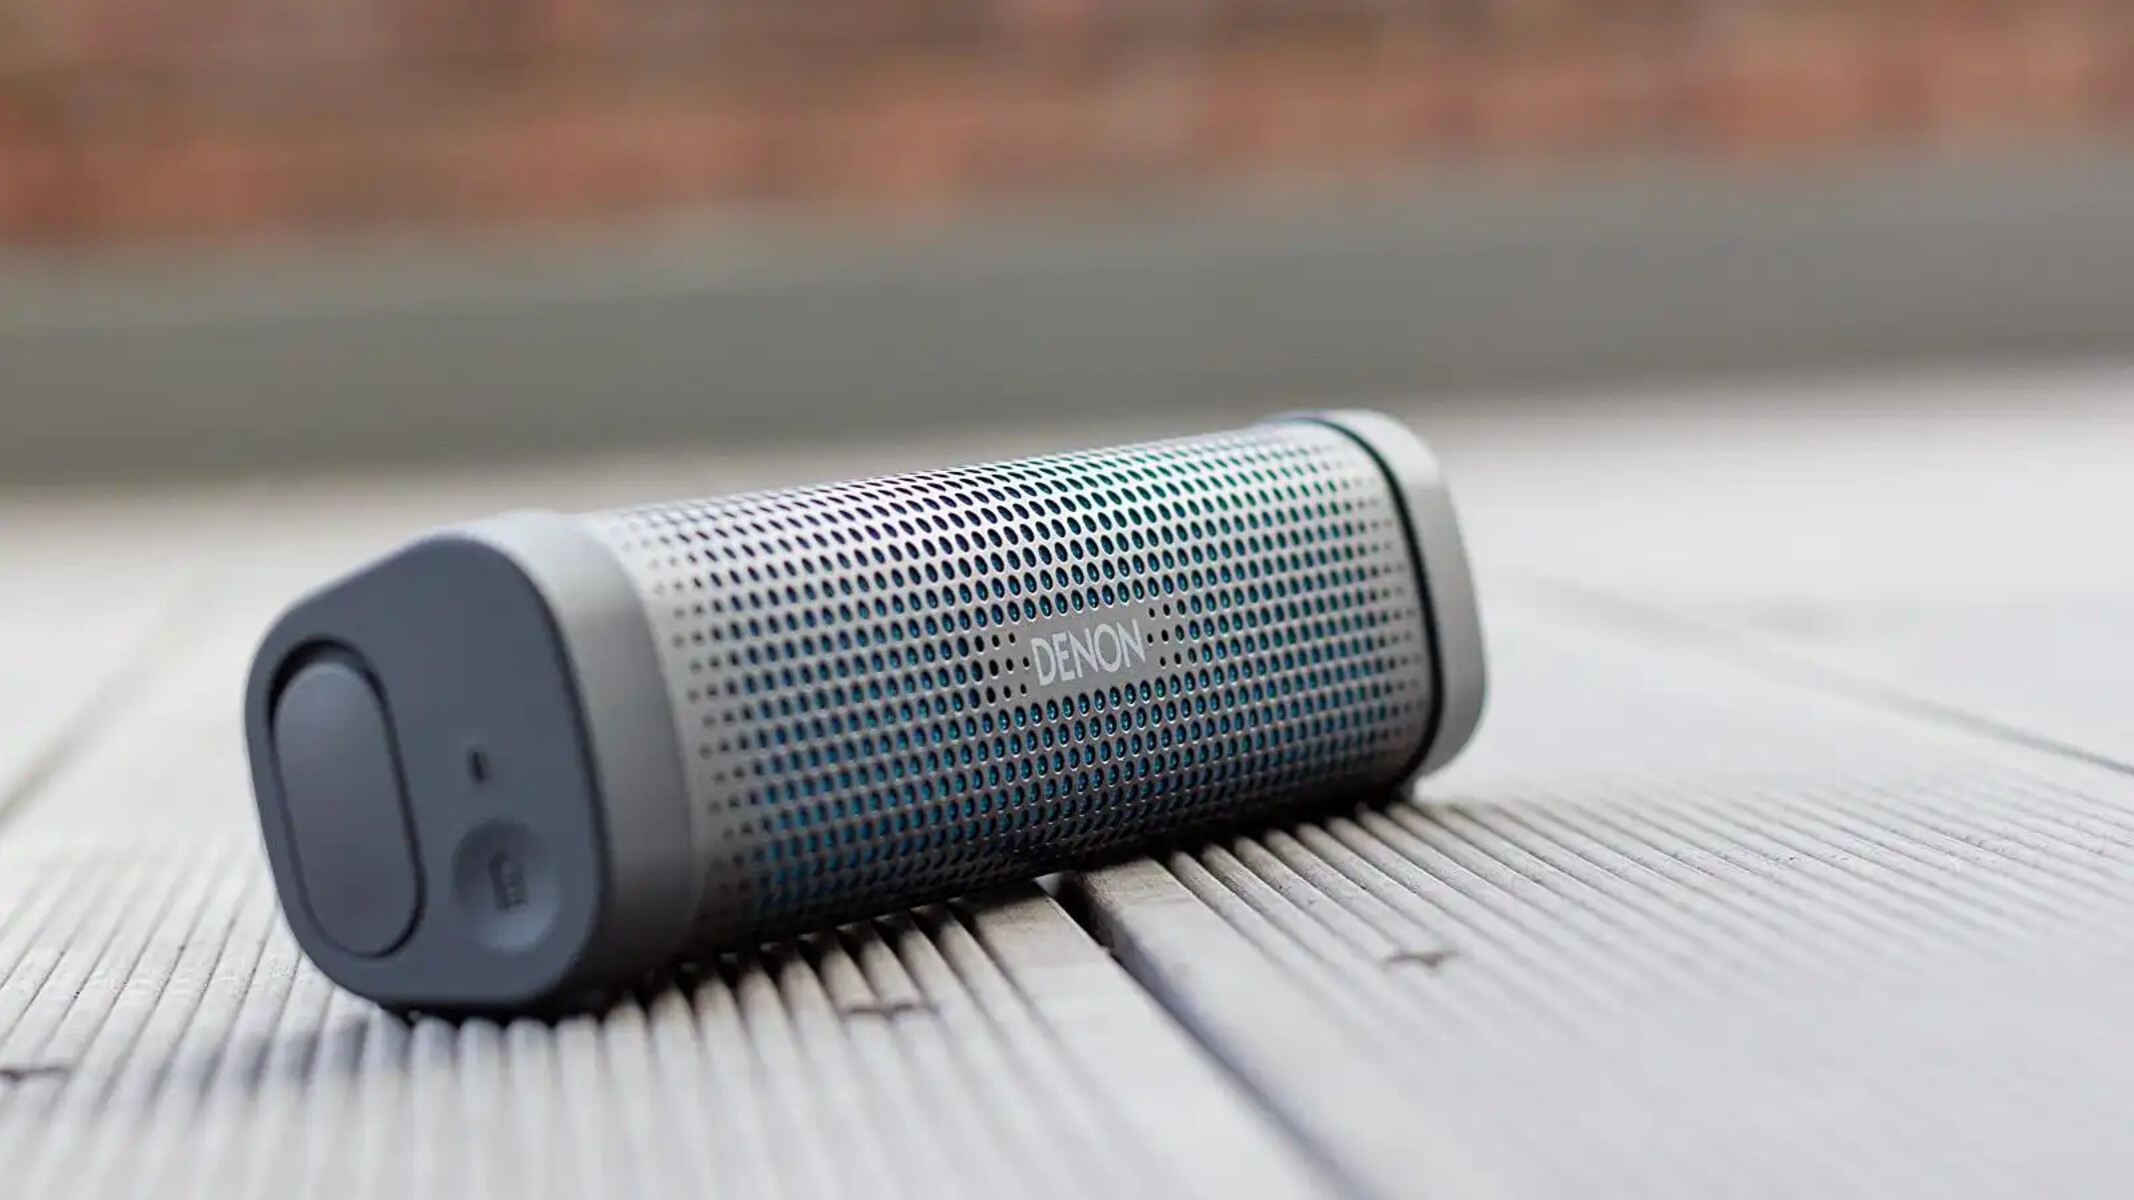 How To Turn An Aux Speaker Into A Smart Speaker Using Raspberry Pi